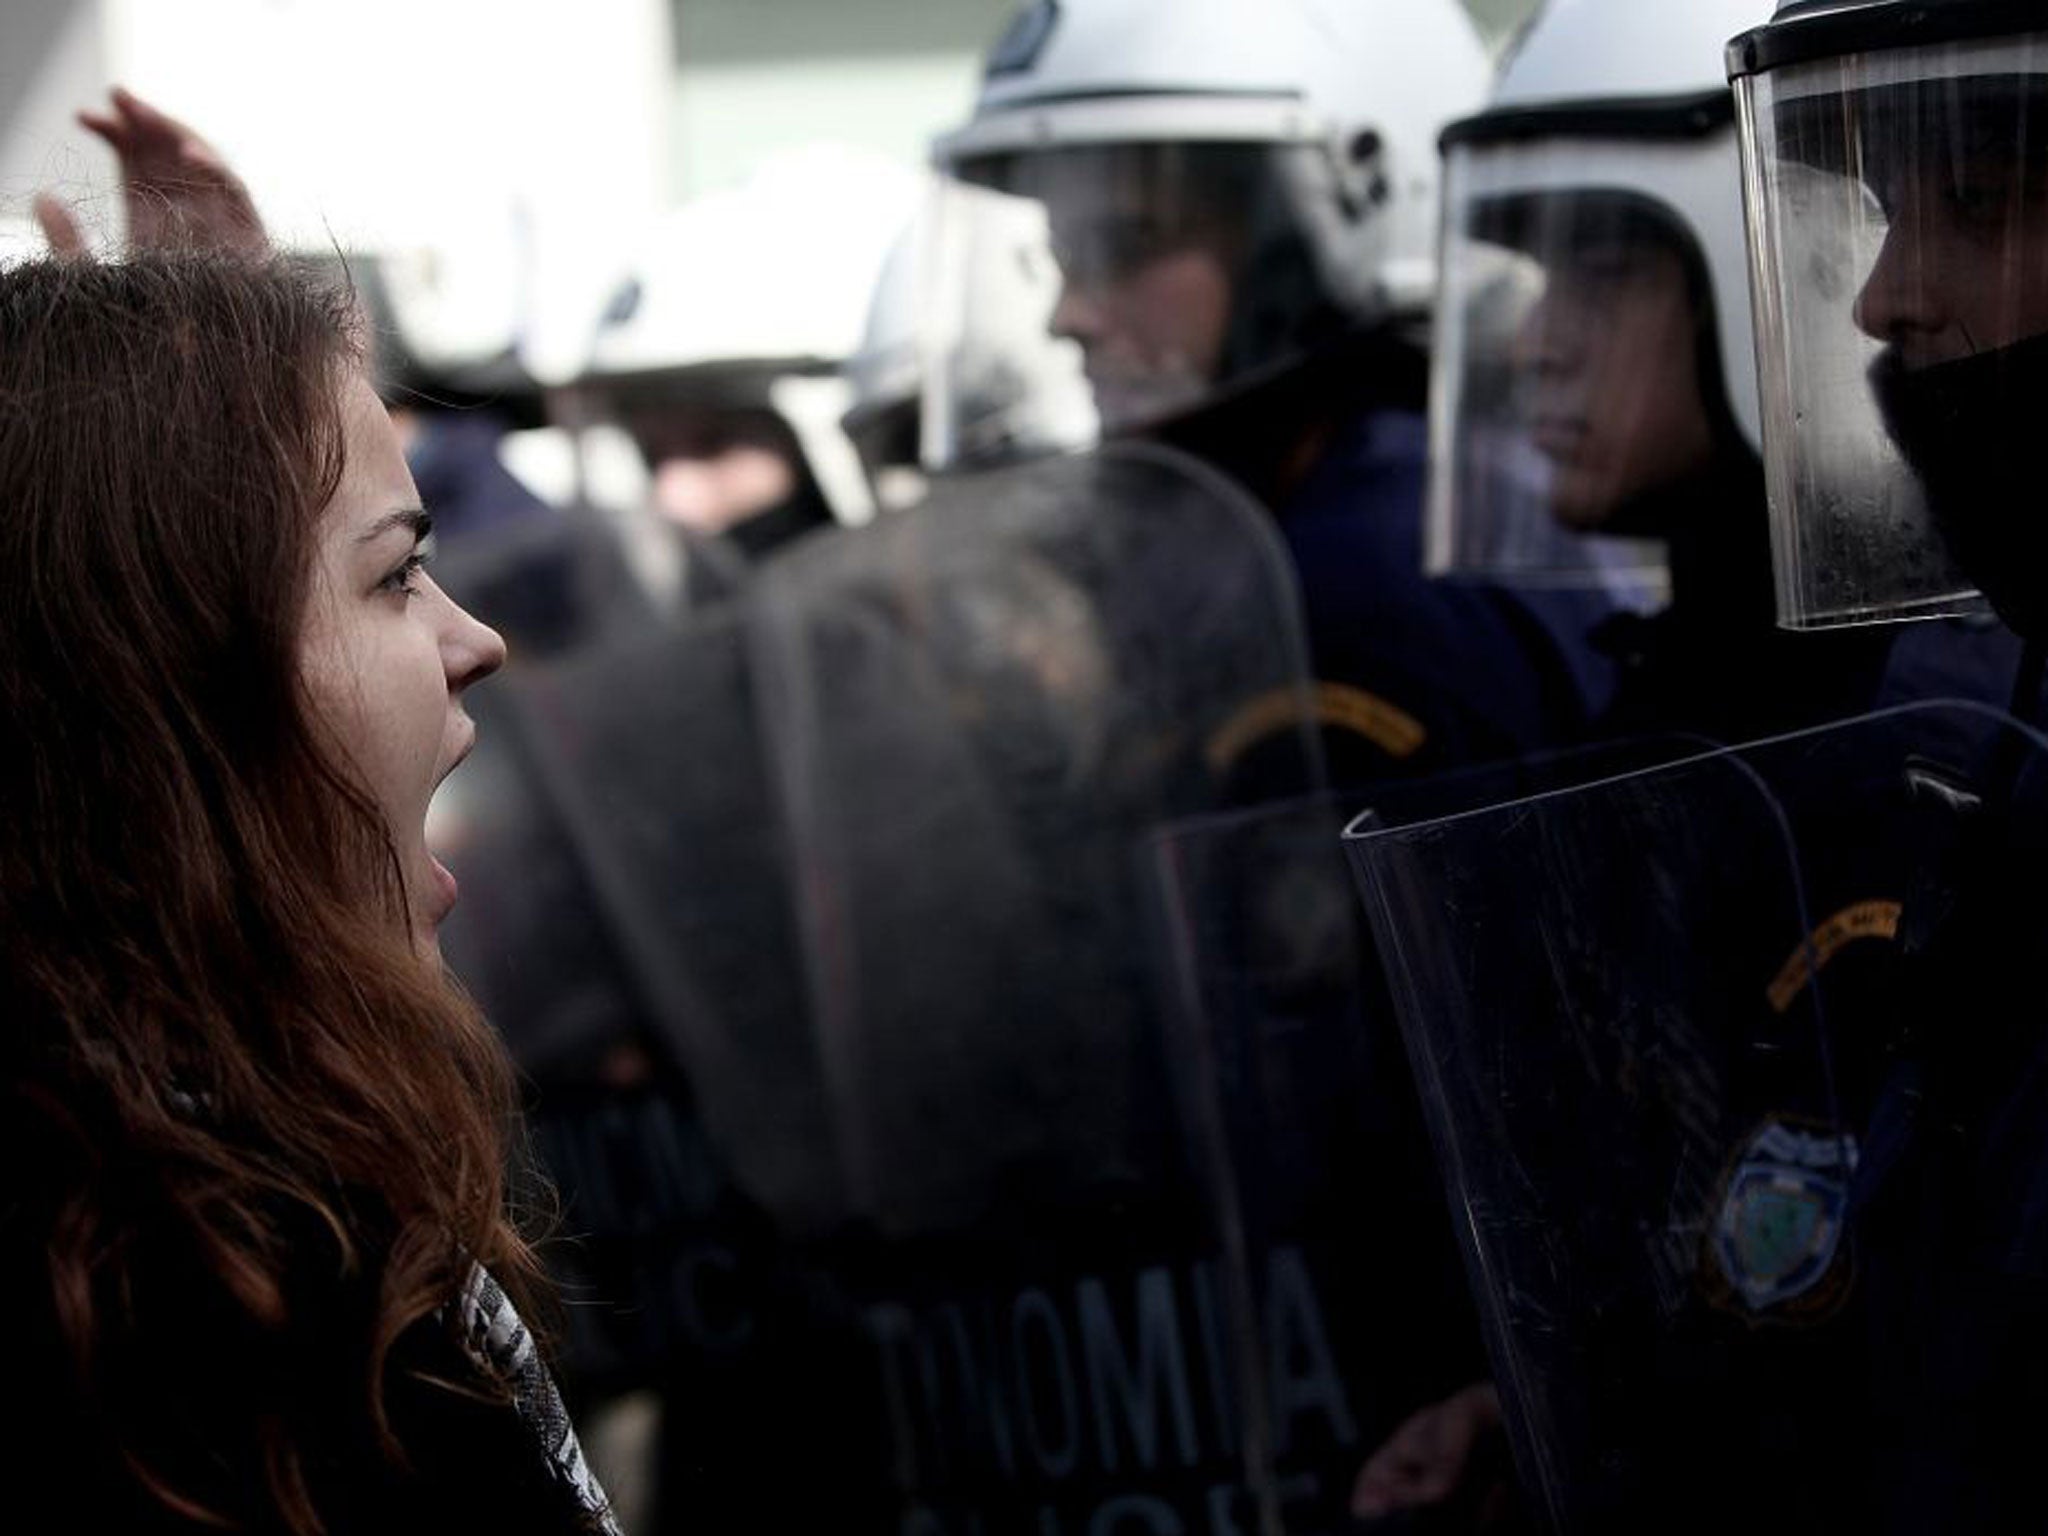 A demonstrator shouts at riot police on November 7, 2013 outside the headquarters of former public broadcaster ERT in Athens. Greek riot police burst into the headquarters of former public broadcaster ERT early on November 7 and forcibly removed employee